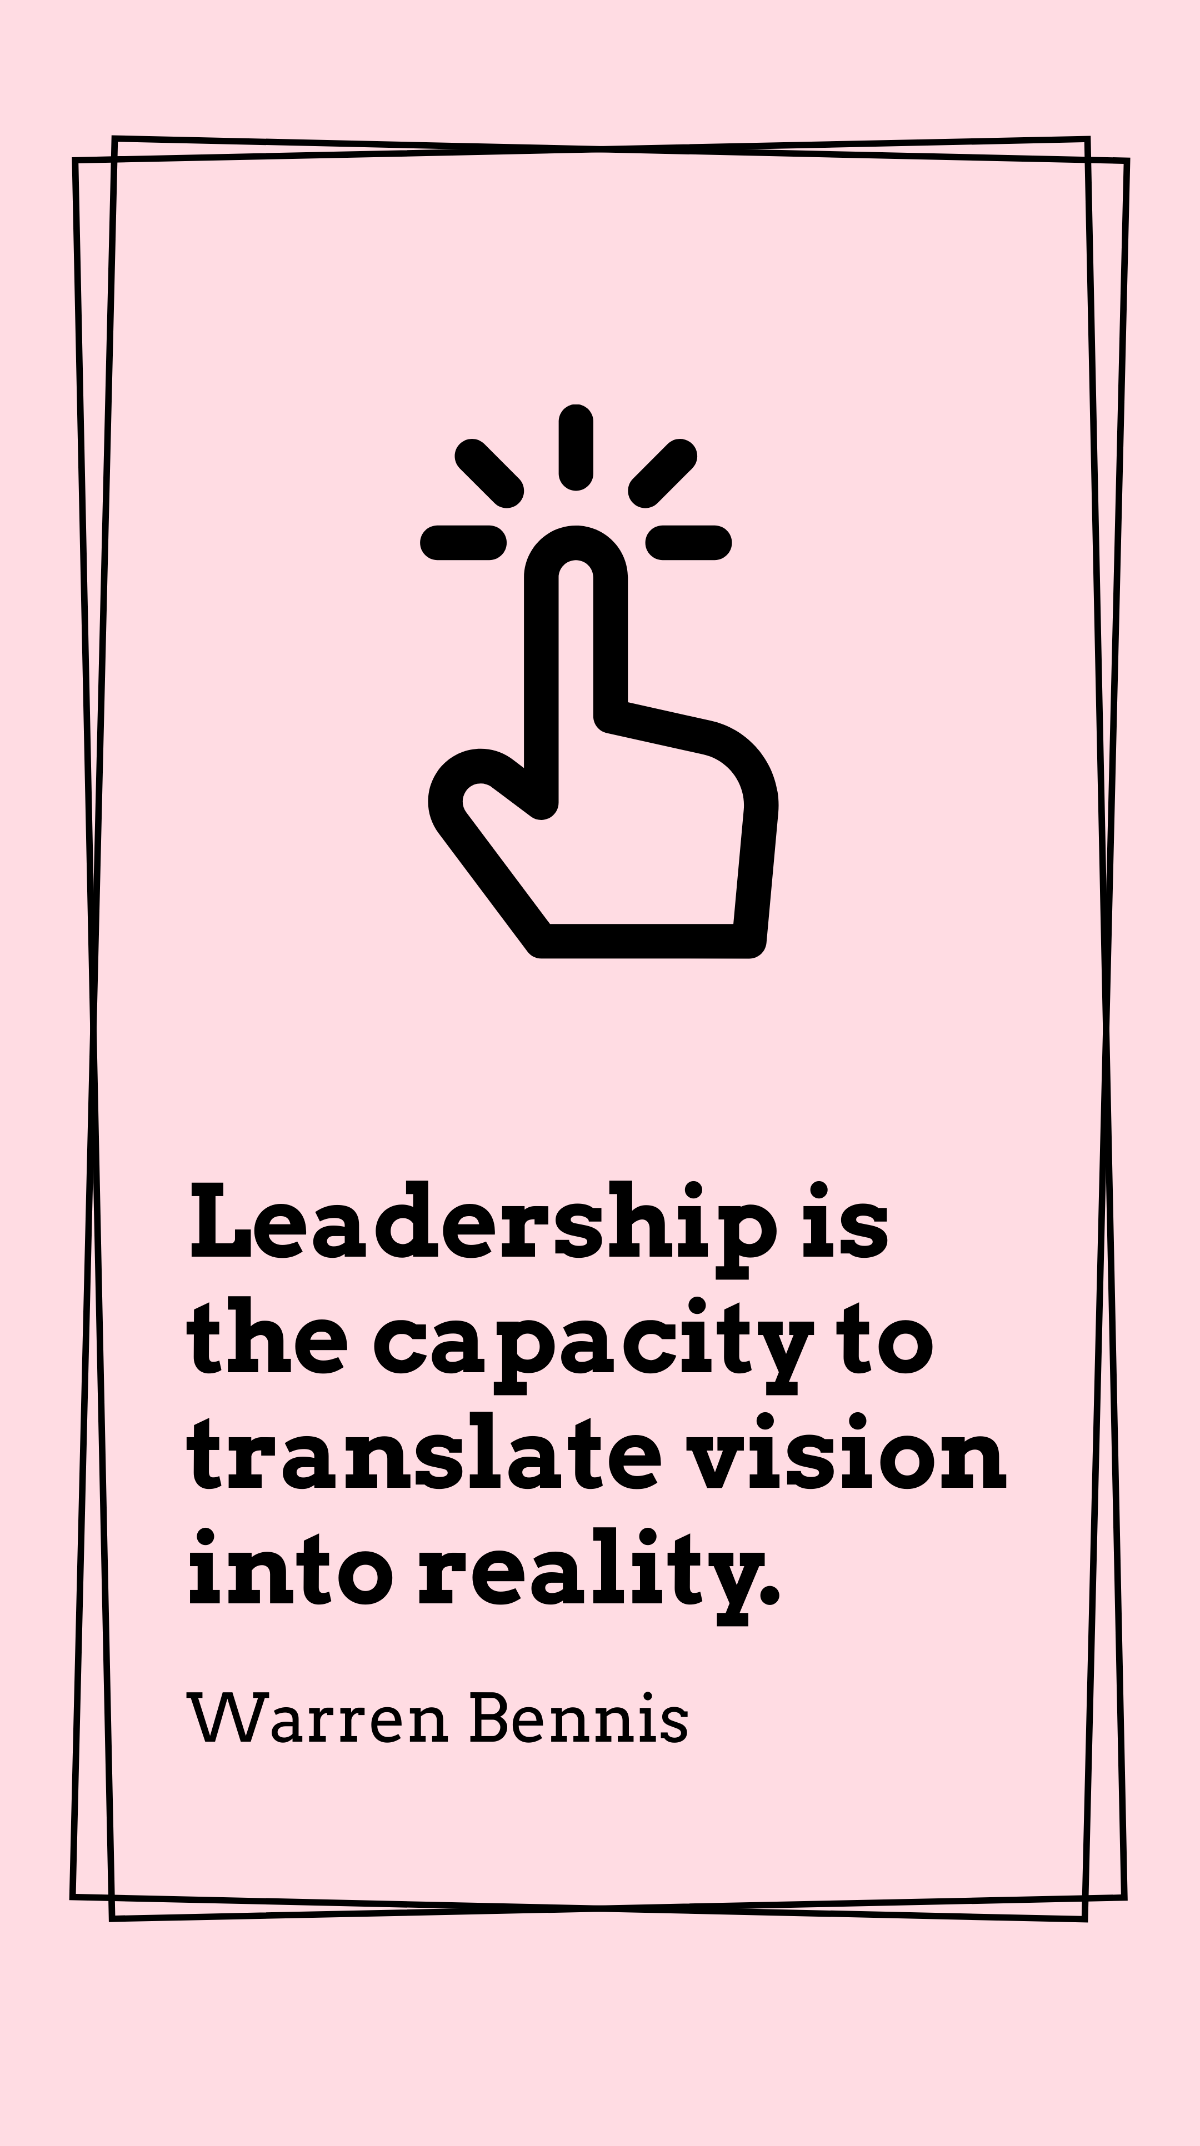 Warren Bennis - Leadership is the capacity to translate vision into reality. Template